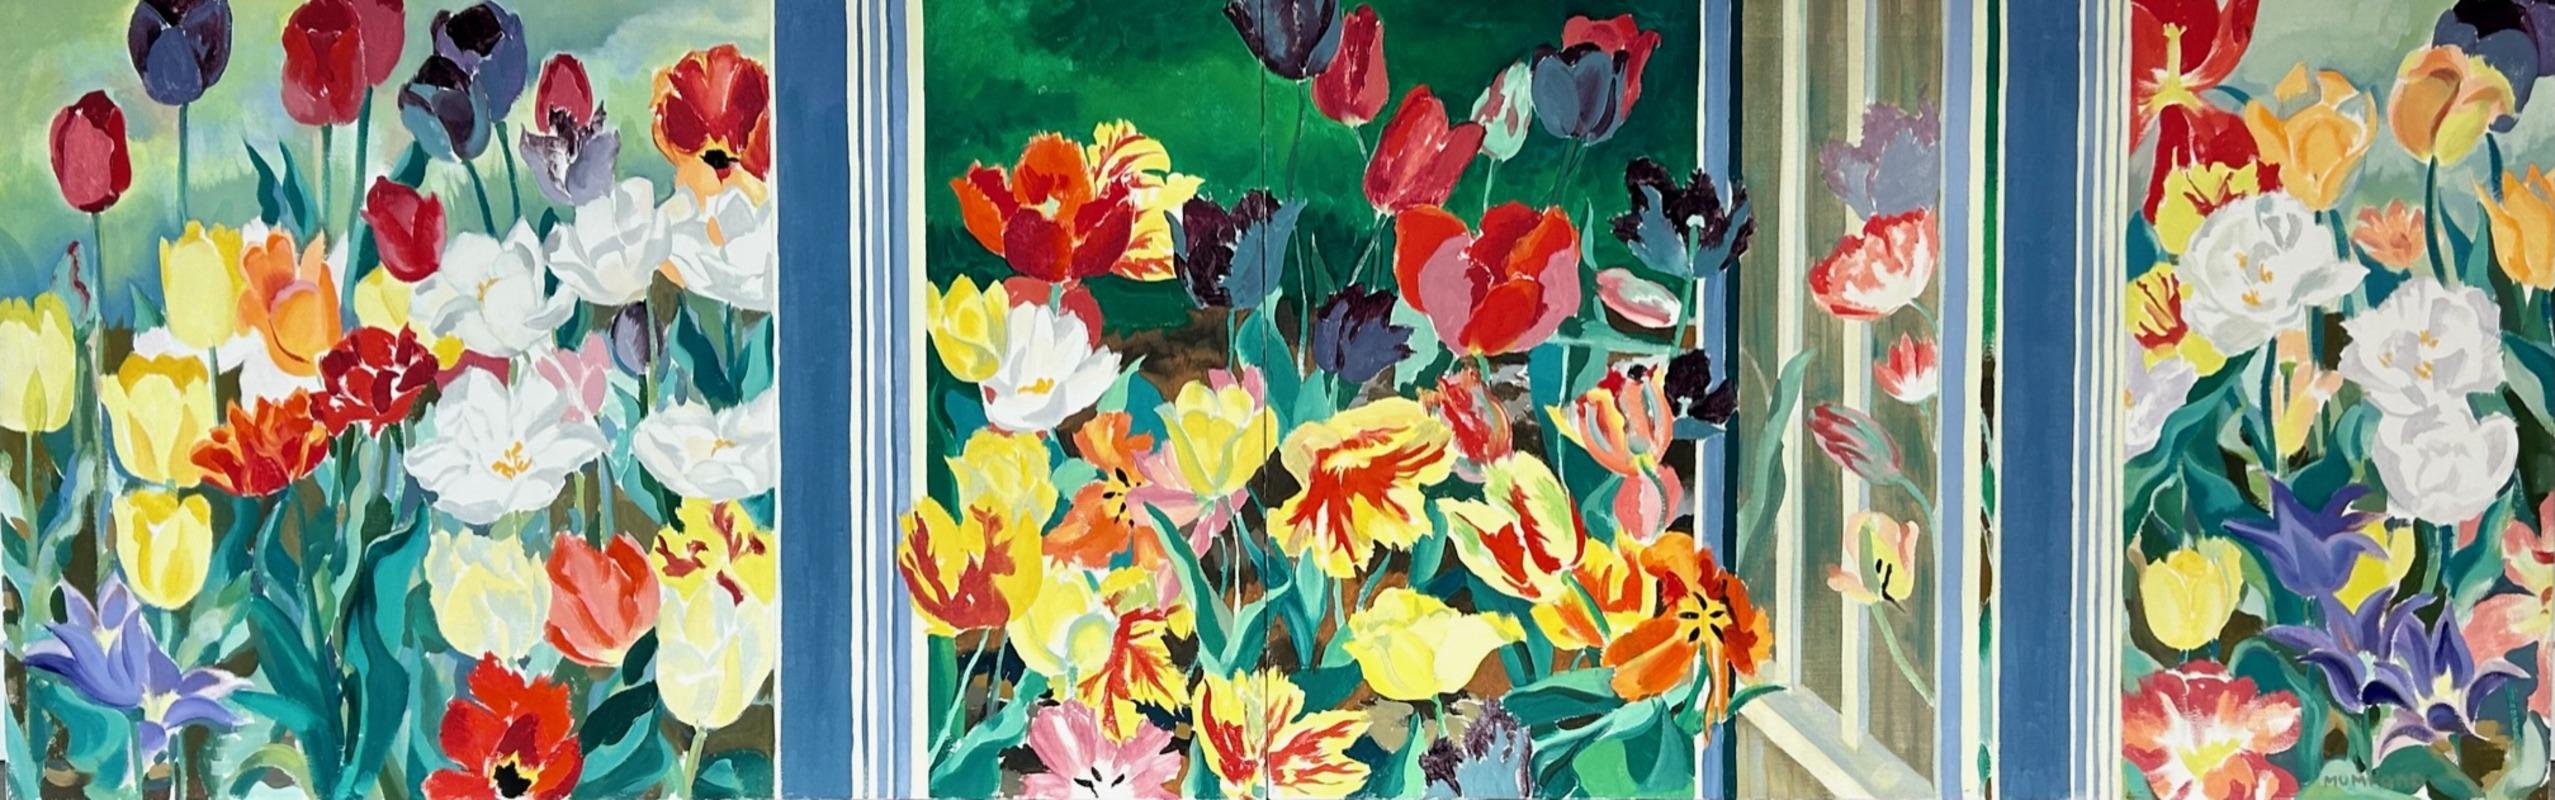 Daphne Mumford
Tulips
Signed lower right, titled on each stretcher
Oil on canvas, diptych
24 x 74 inches

Daphne Mumford studied at the Skowhegan School of Painting in 1952; the Chelsea School of Art, London in 1952-53; and the Brooklyn Museum